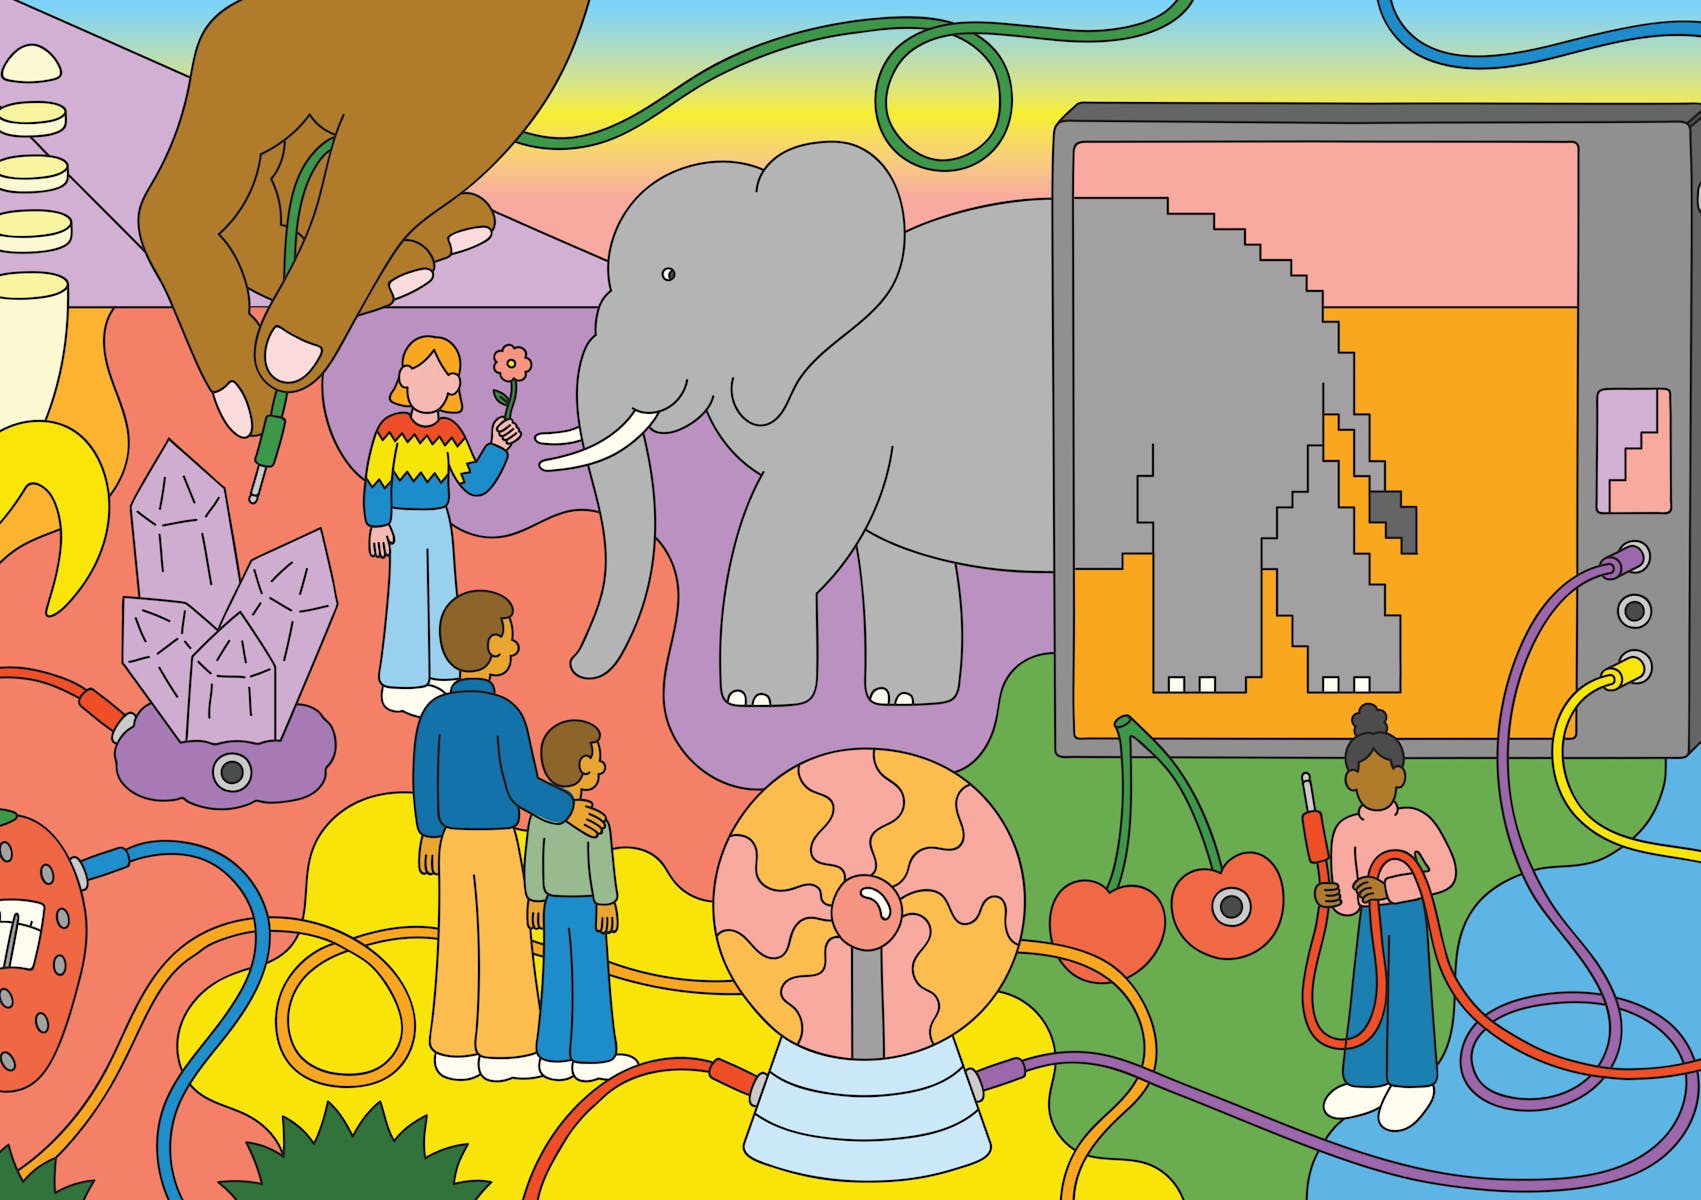 Multicolored illustration of surreal elements including elephant, iPad, cherries, people, cables.